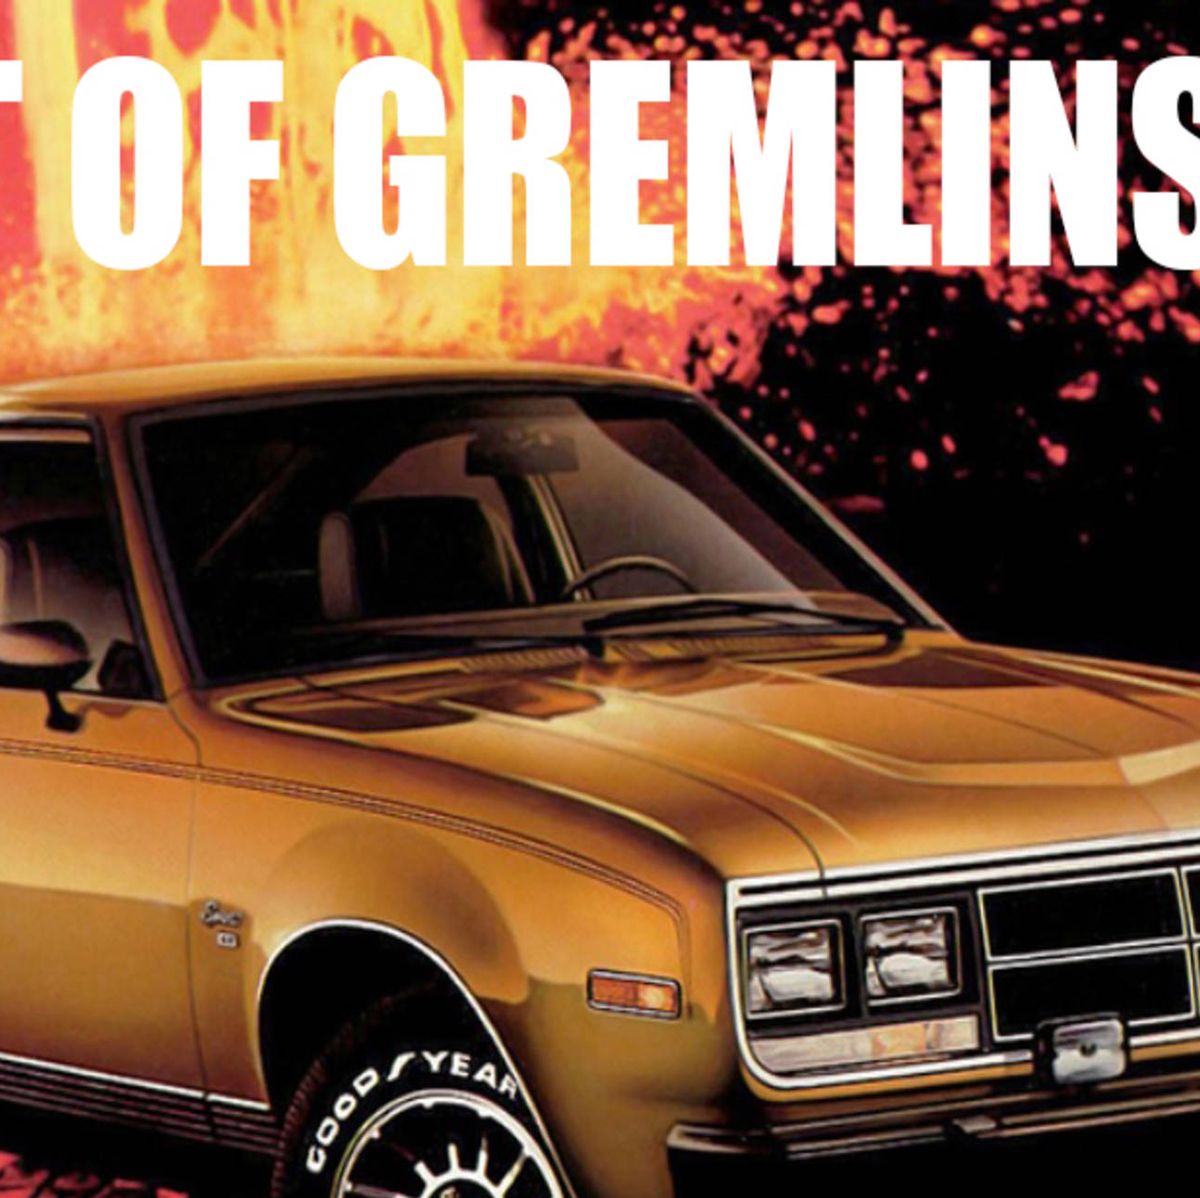 The 10 best performance cars of the 1980s